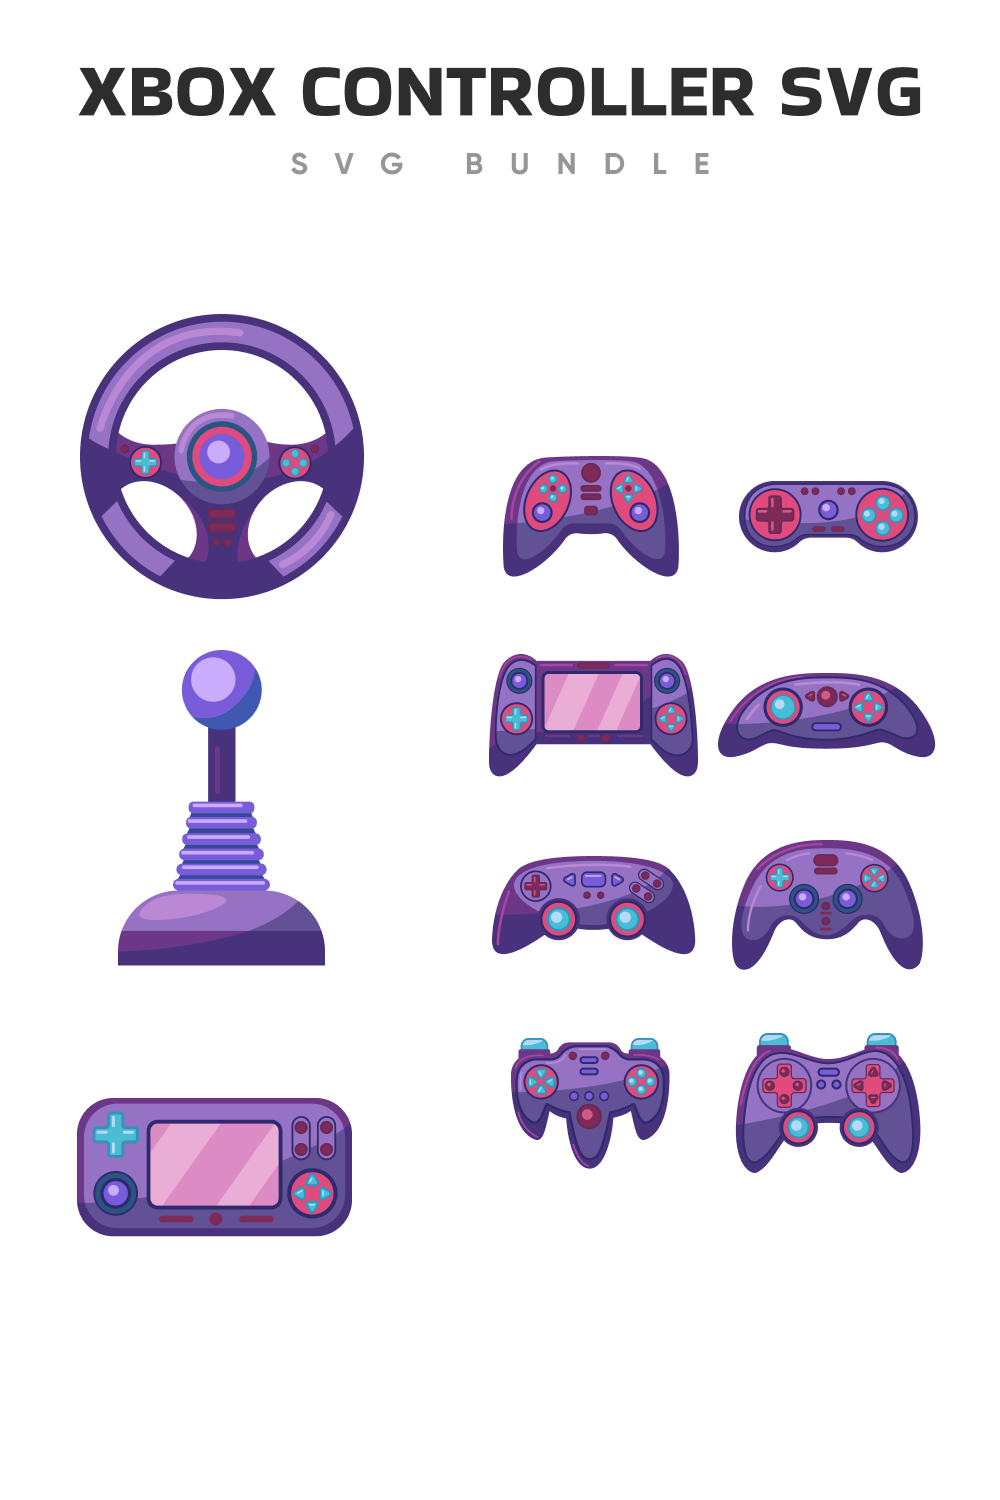 Purple xbox items for the full composition.